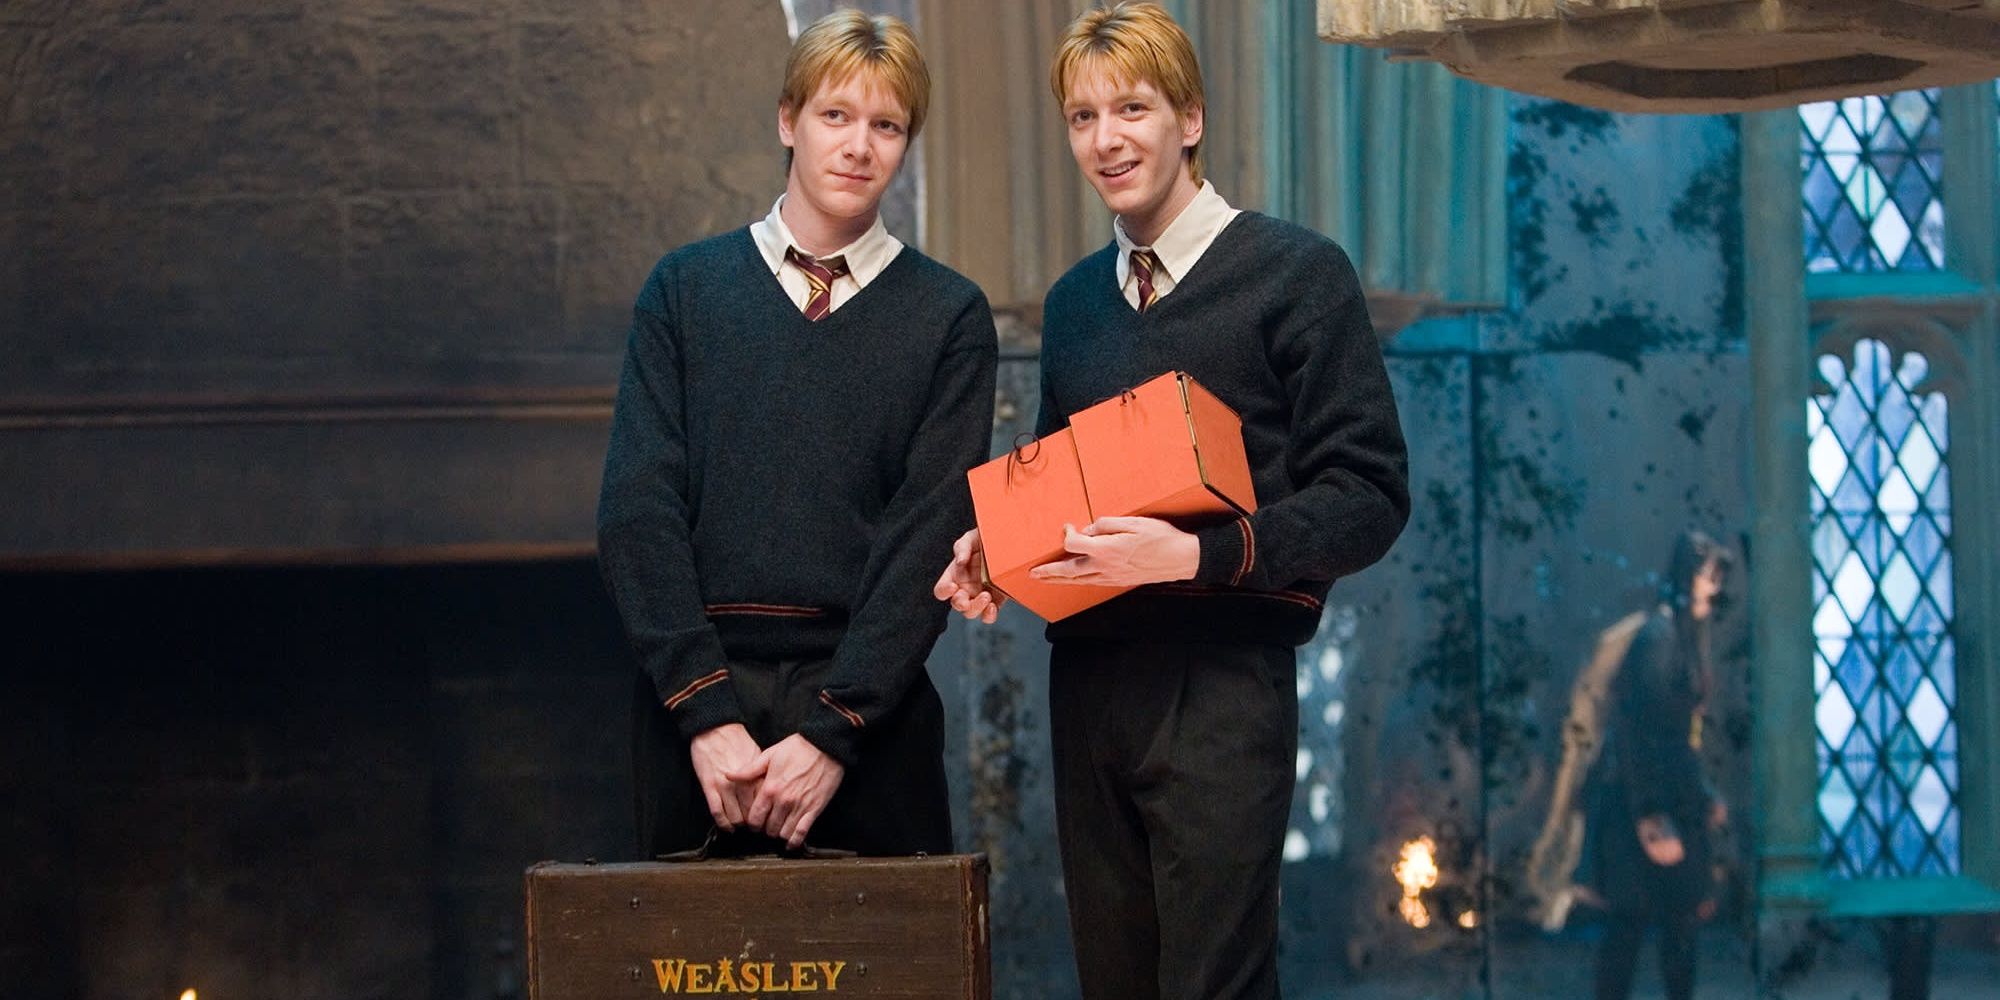 fred and george weasley from harry potter holding bags at hogwarts